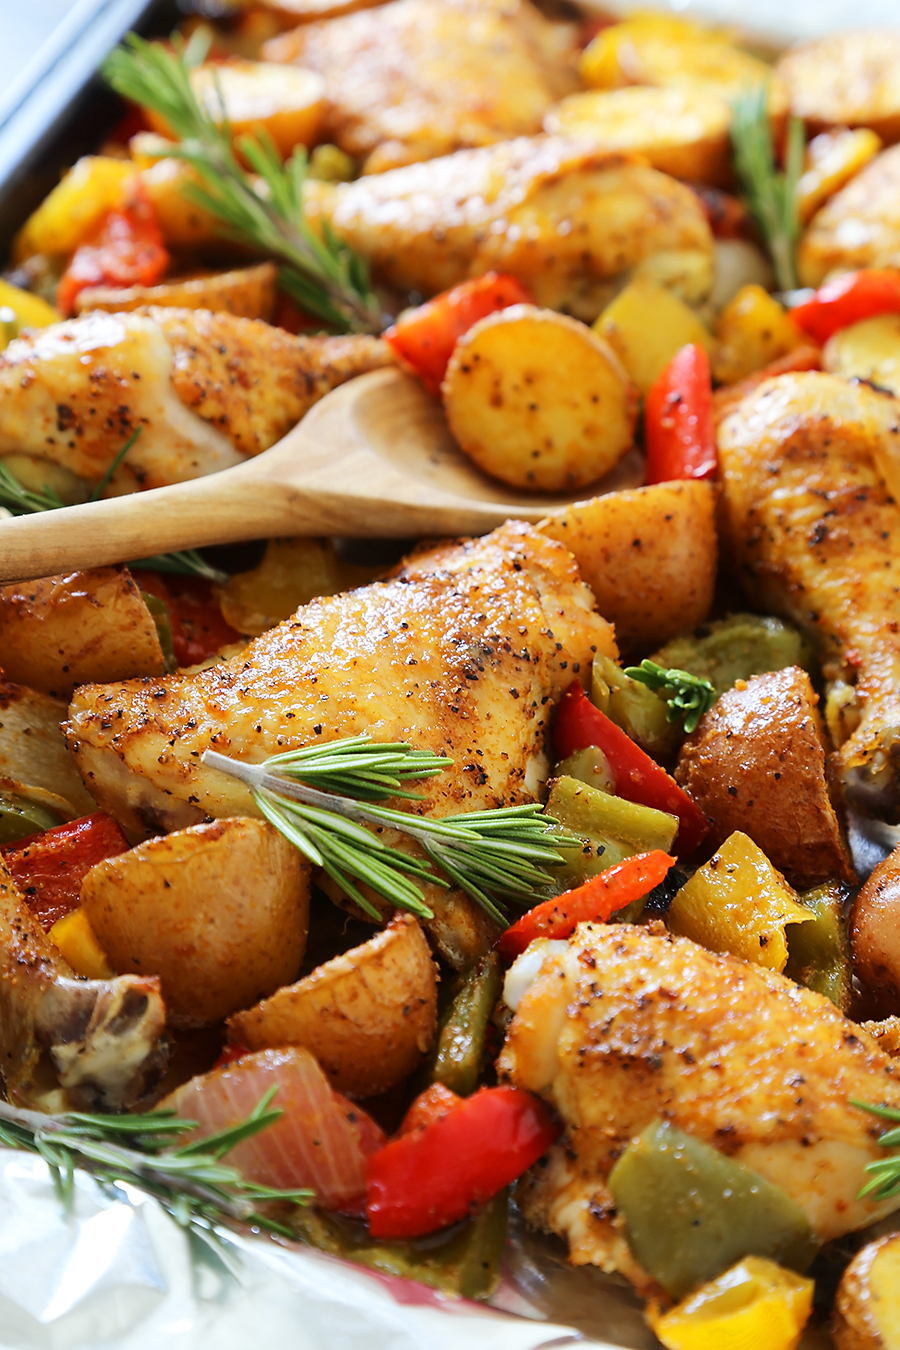 Rosemary Roasted Chicken with Bell Peppers and Potatoes - Crispy, tender roasted chicken with bell peppers, potatoes and onions makes an easy one-pan weeknight meal! Thecomfortofcooking.com